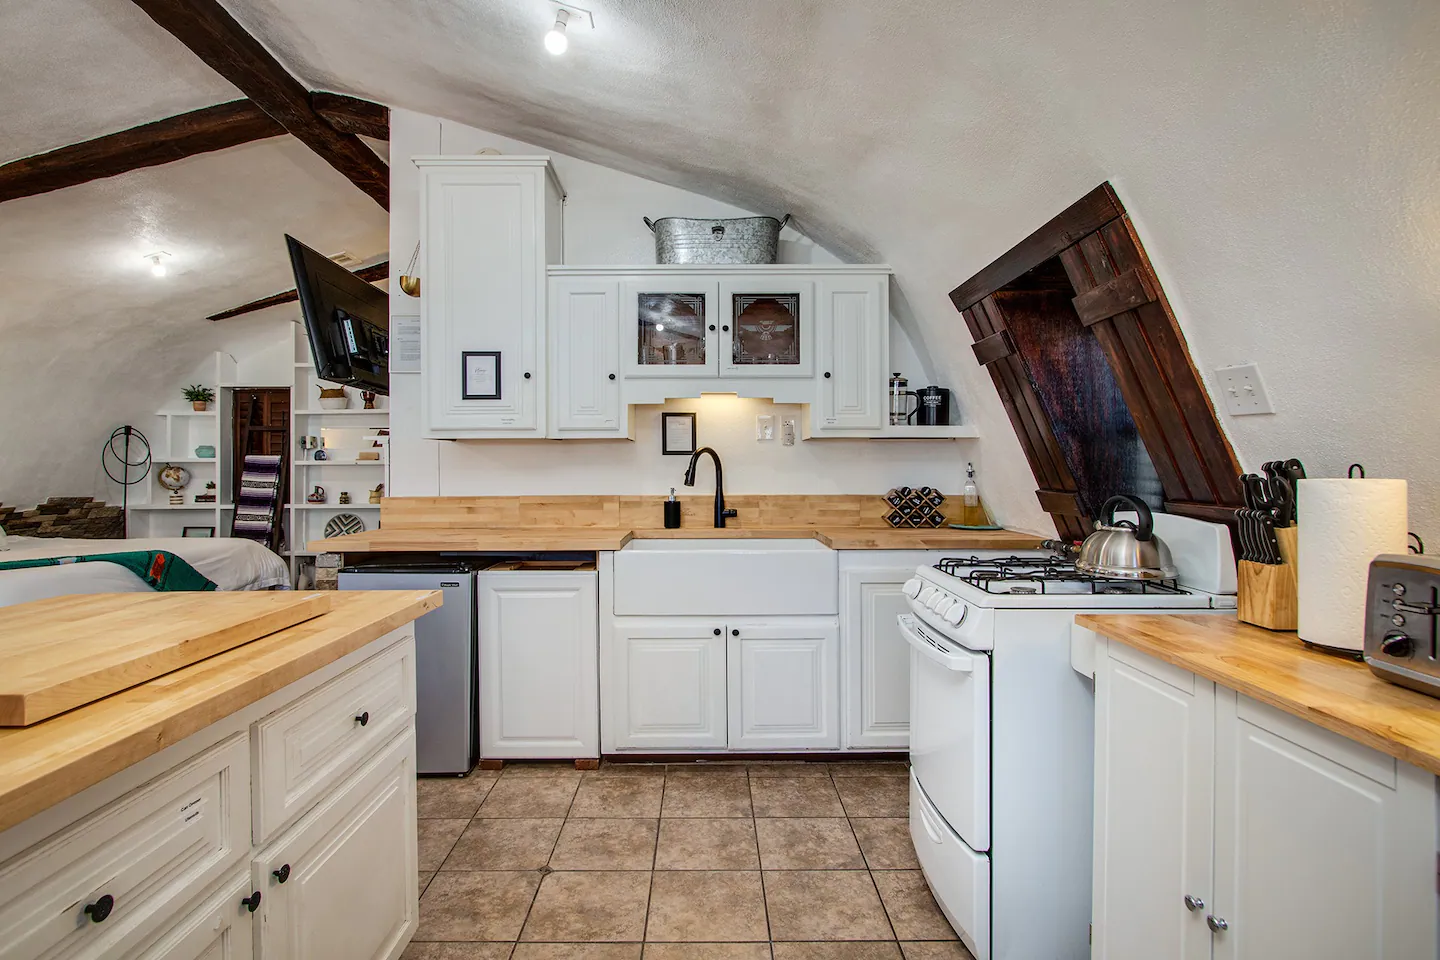 Complete kitchen with high-efficiency appliances, utensils, cookware, and prep equipment.